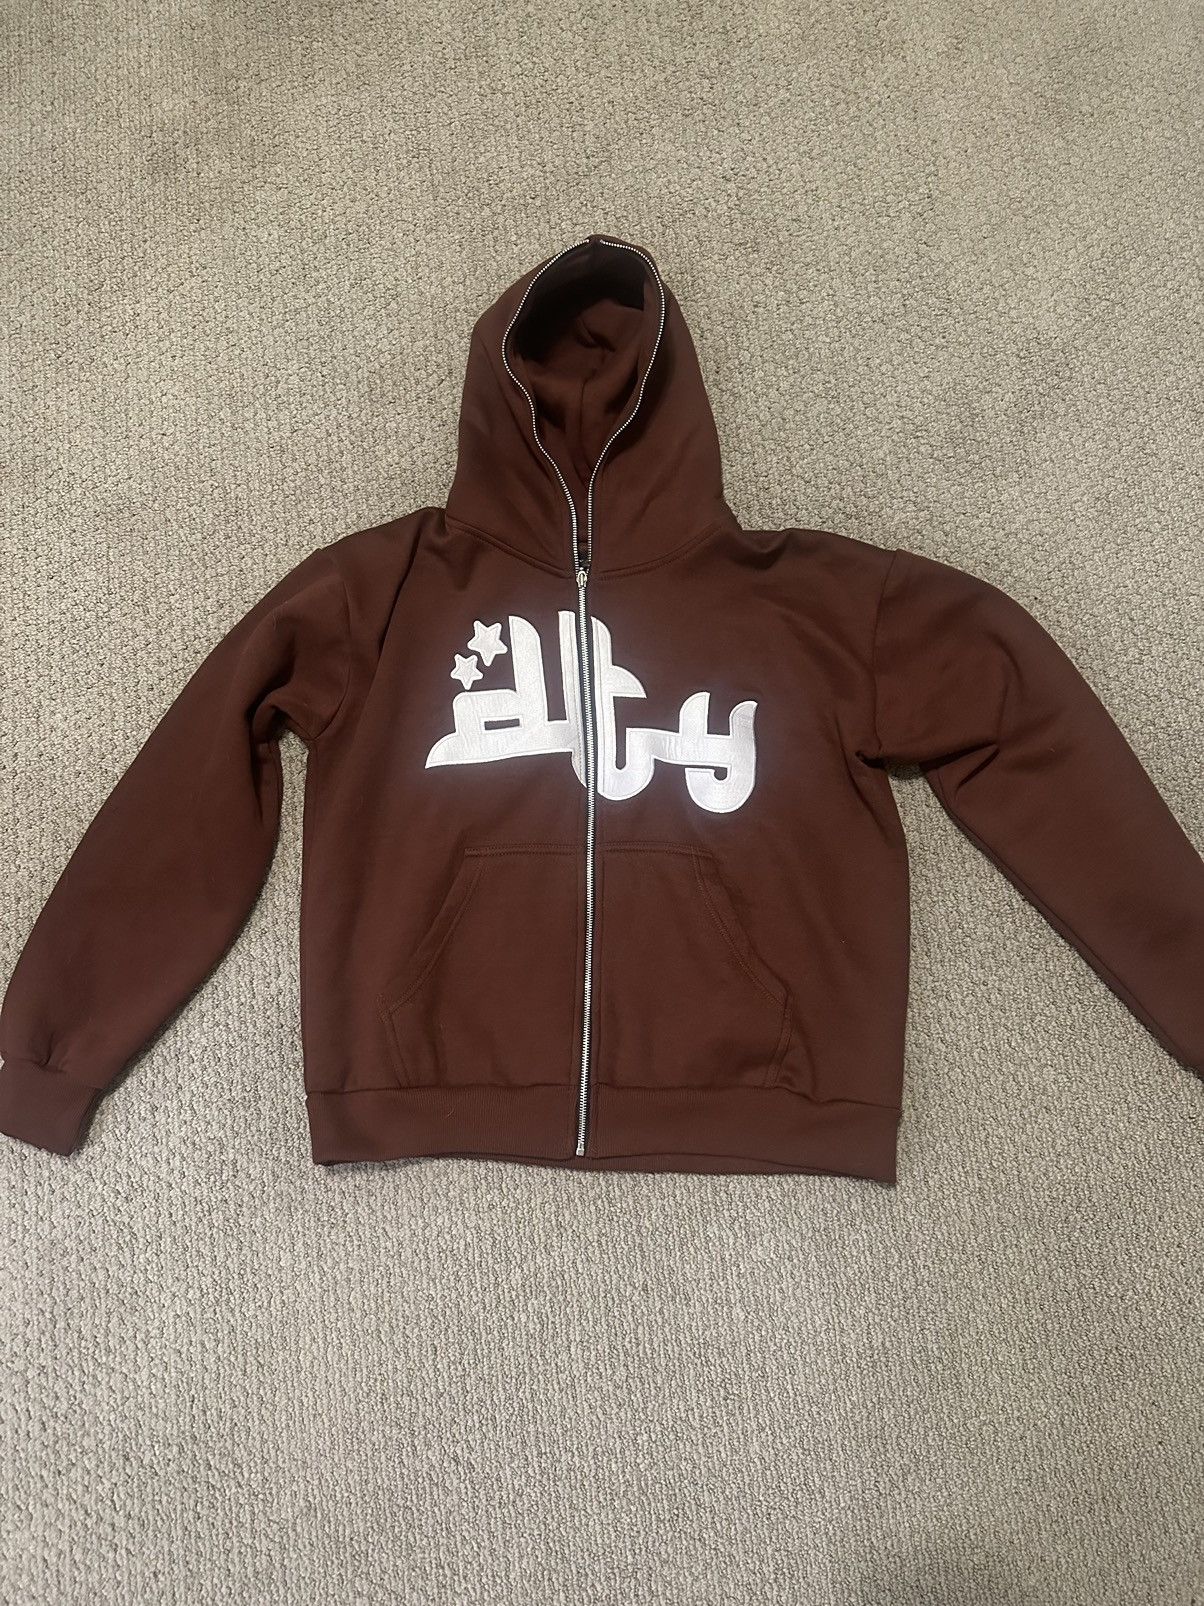 Divide The Youth Divide the youth brown full zip up | Grailed